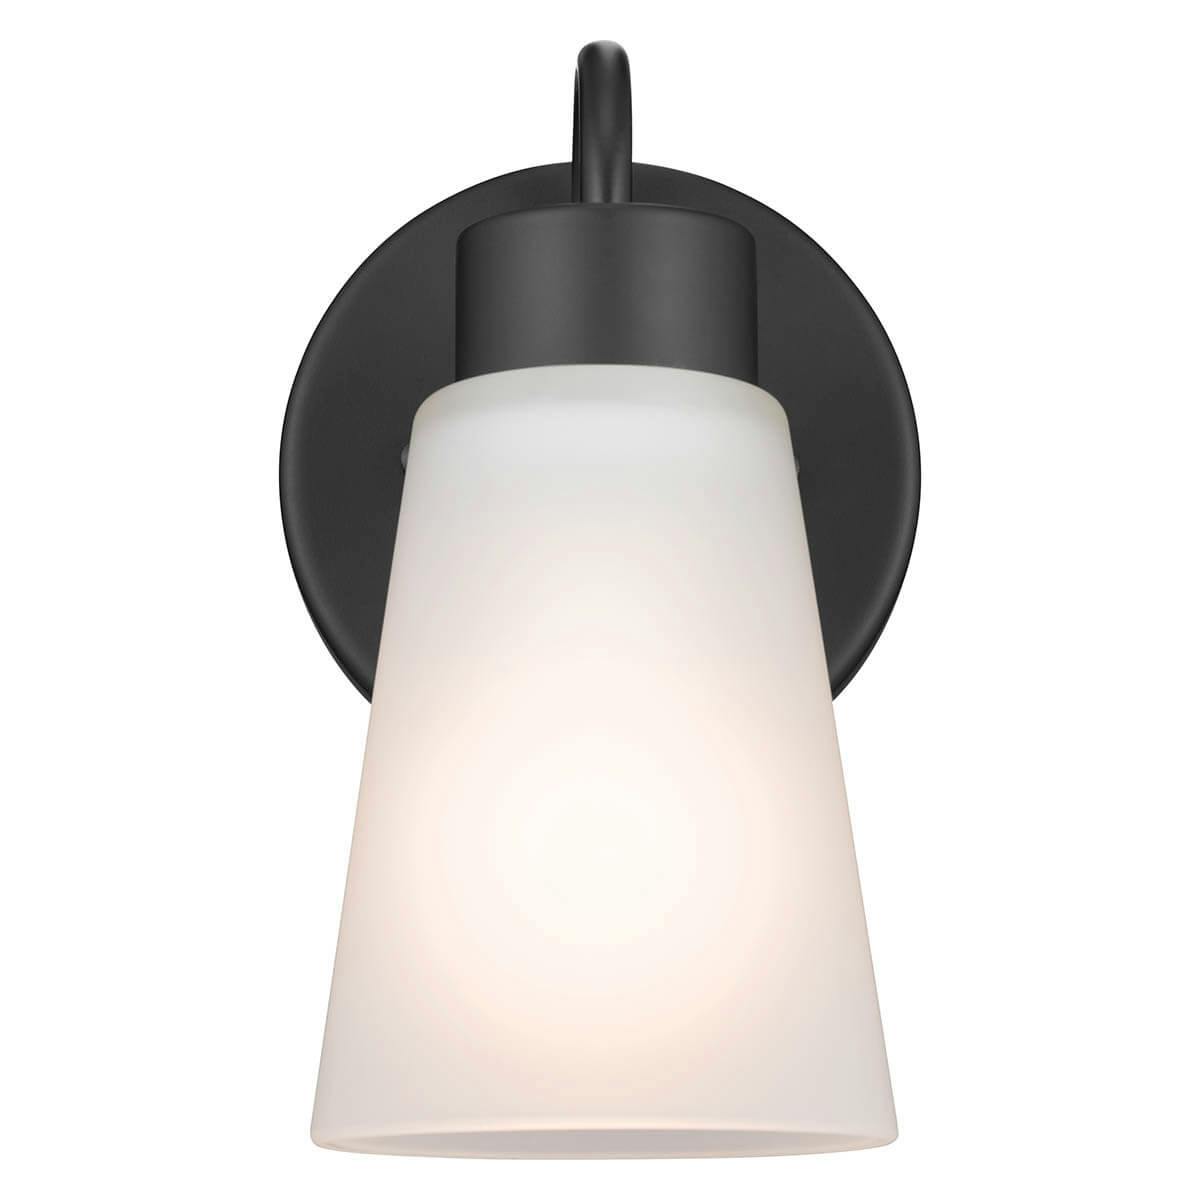 Front view of the Erma 4.25" 1 Light Wall Sconce Black on a white background